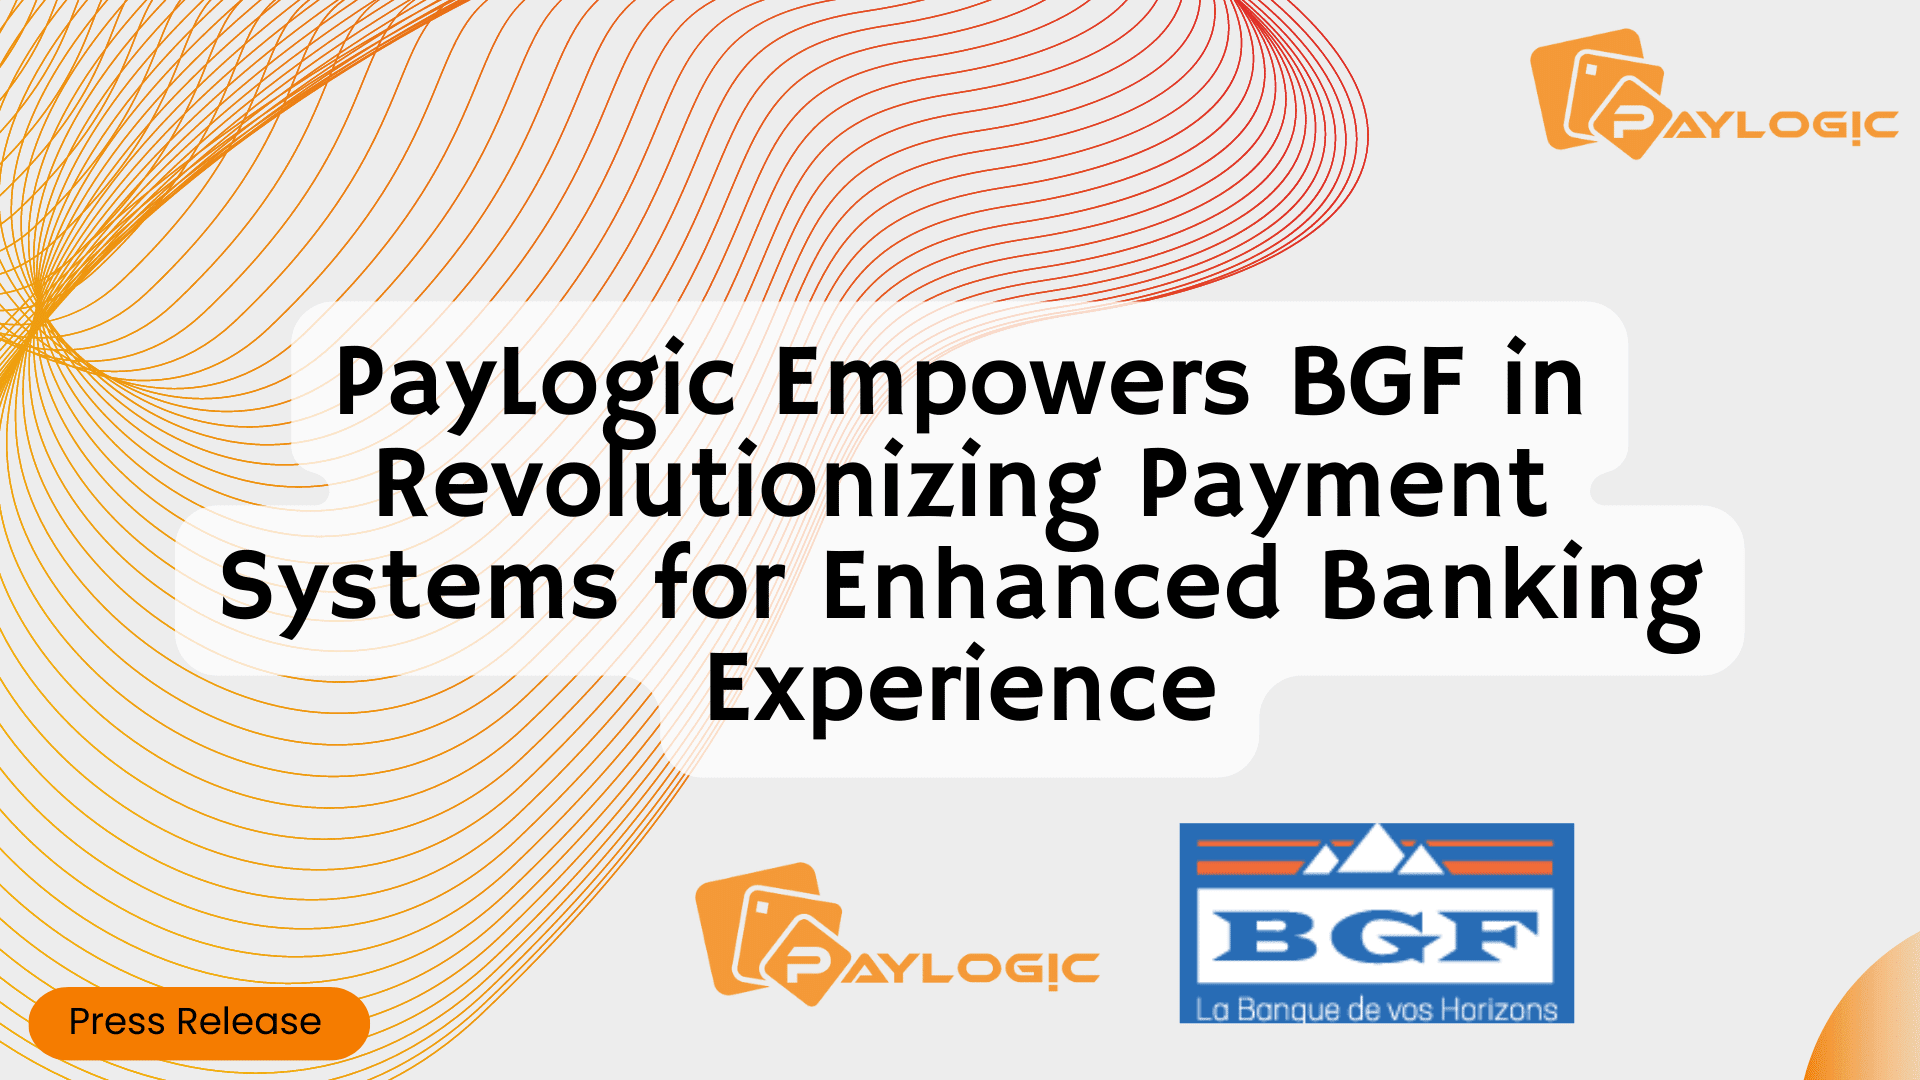 PayLogic Empowers BGF in Revolutionizing Payment Systems for Enhanced Banking Experience